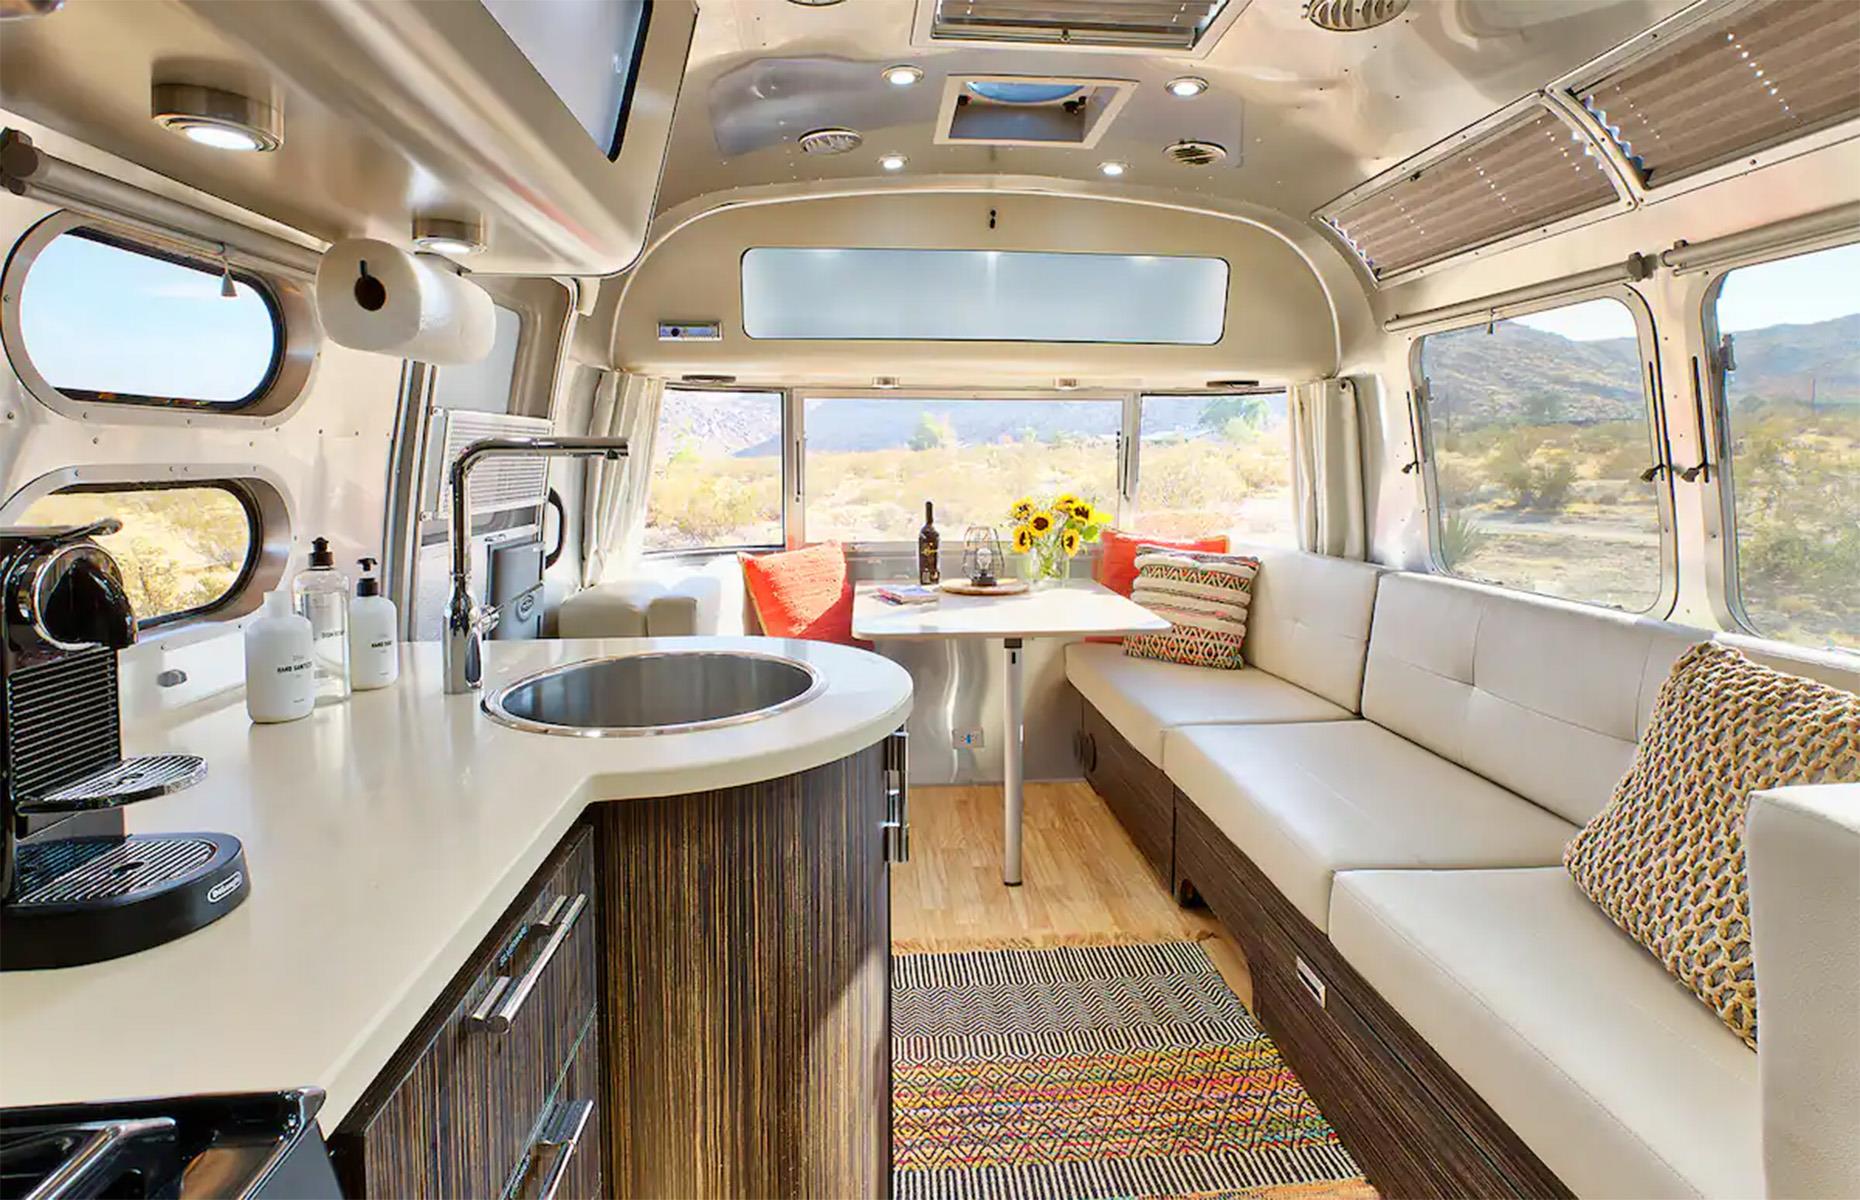 <p>In addition to a queen-size bed at the rear, the couch converts easily into a secondary single bed, allowing the Airstream to comfortably sleep up to three people.</p>  <p>There’s also more than enough room to spread out outside, with two spacious wooden decks, an outdoor fireplace, a Jacuzzi, a cowboy tub, an outdoor shower and a built-in barbecue area fully equipped with a propane grill, side burner and sink. Imagine dining alfresco against that stunning desert mountain backdrop!</p>